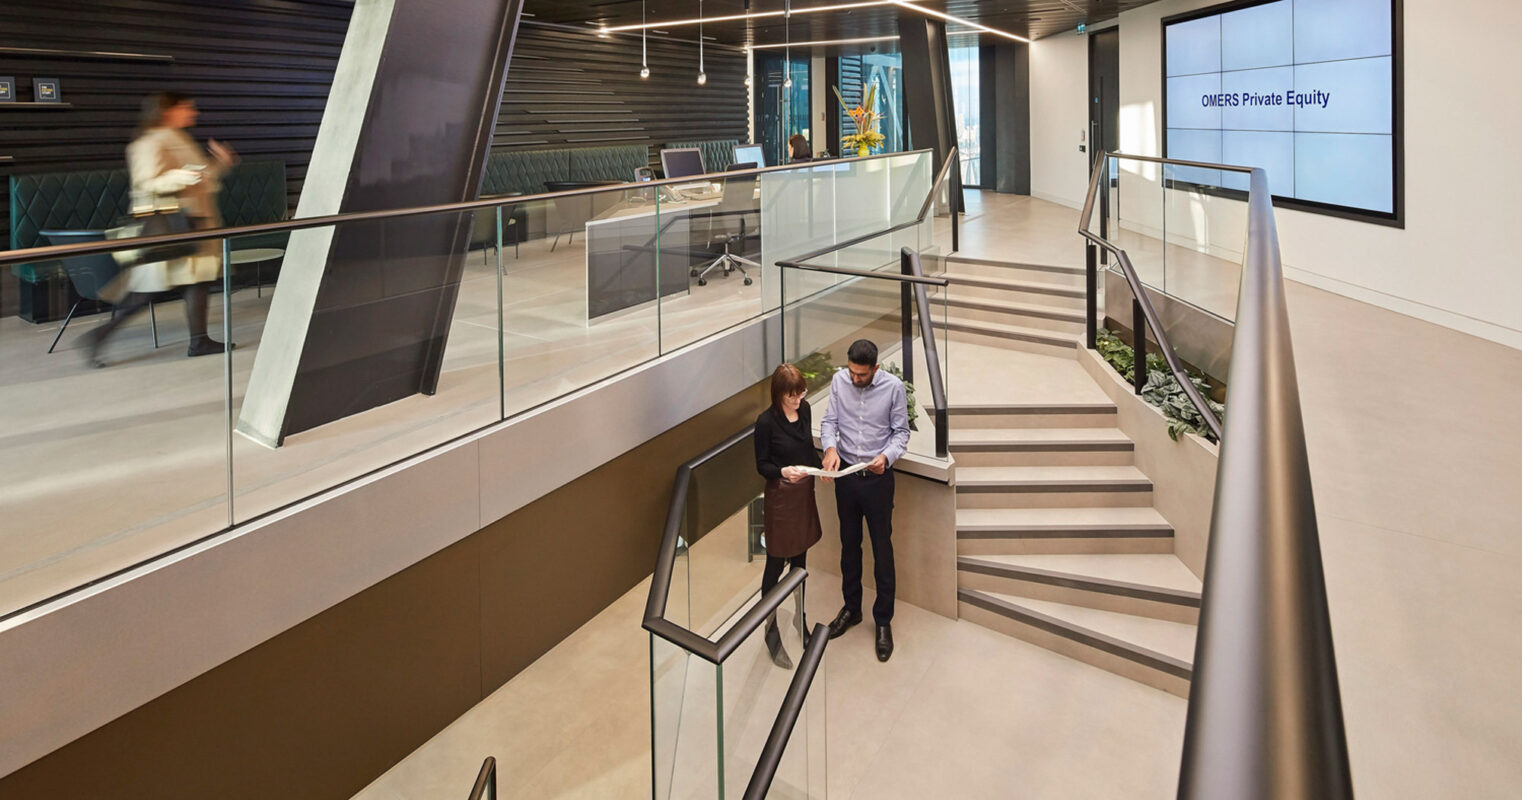 Modern office interior showcasing a sleek staircase with metal railings connecting split levels. Glass partitions create transparent office spaces, while a digital screen displays 'CDRS Private Equity.' Ambient lighting emphasizes the geometric lines and professional ambiance.